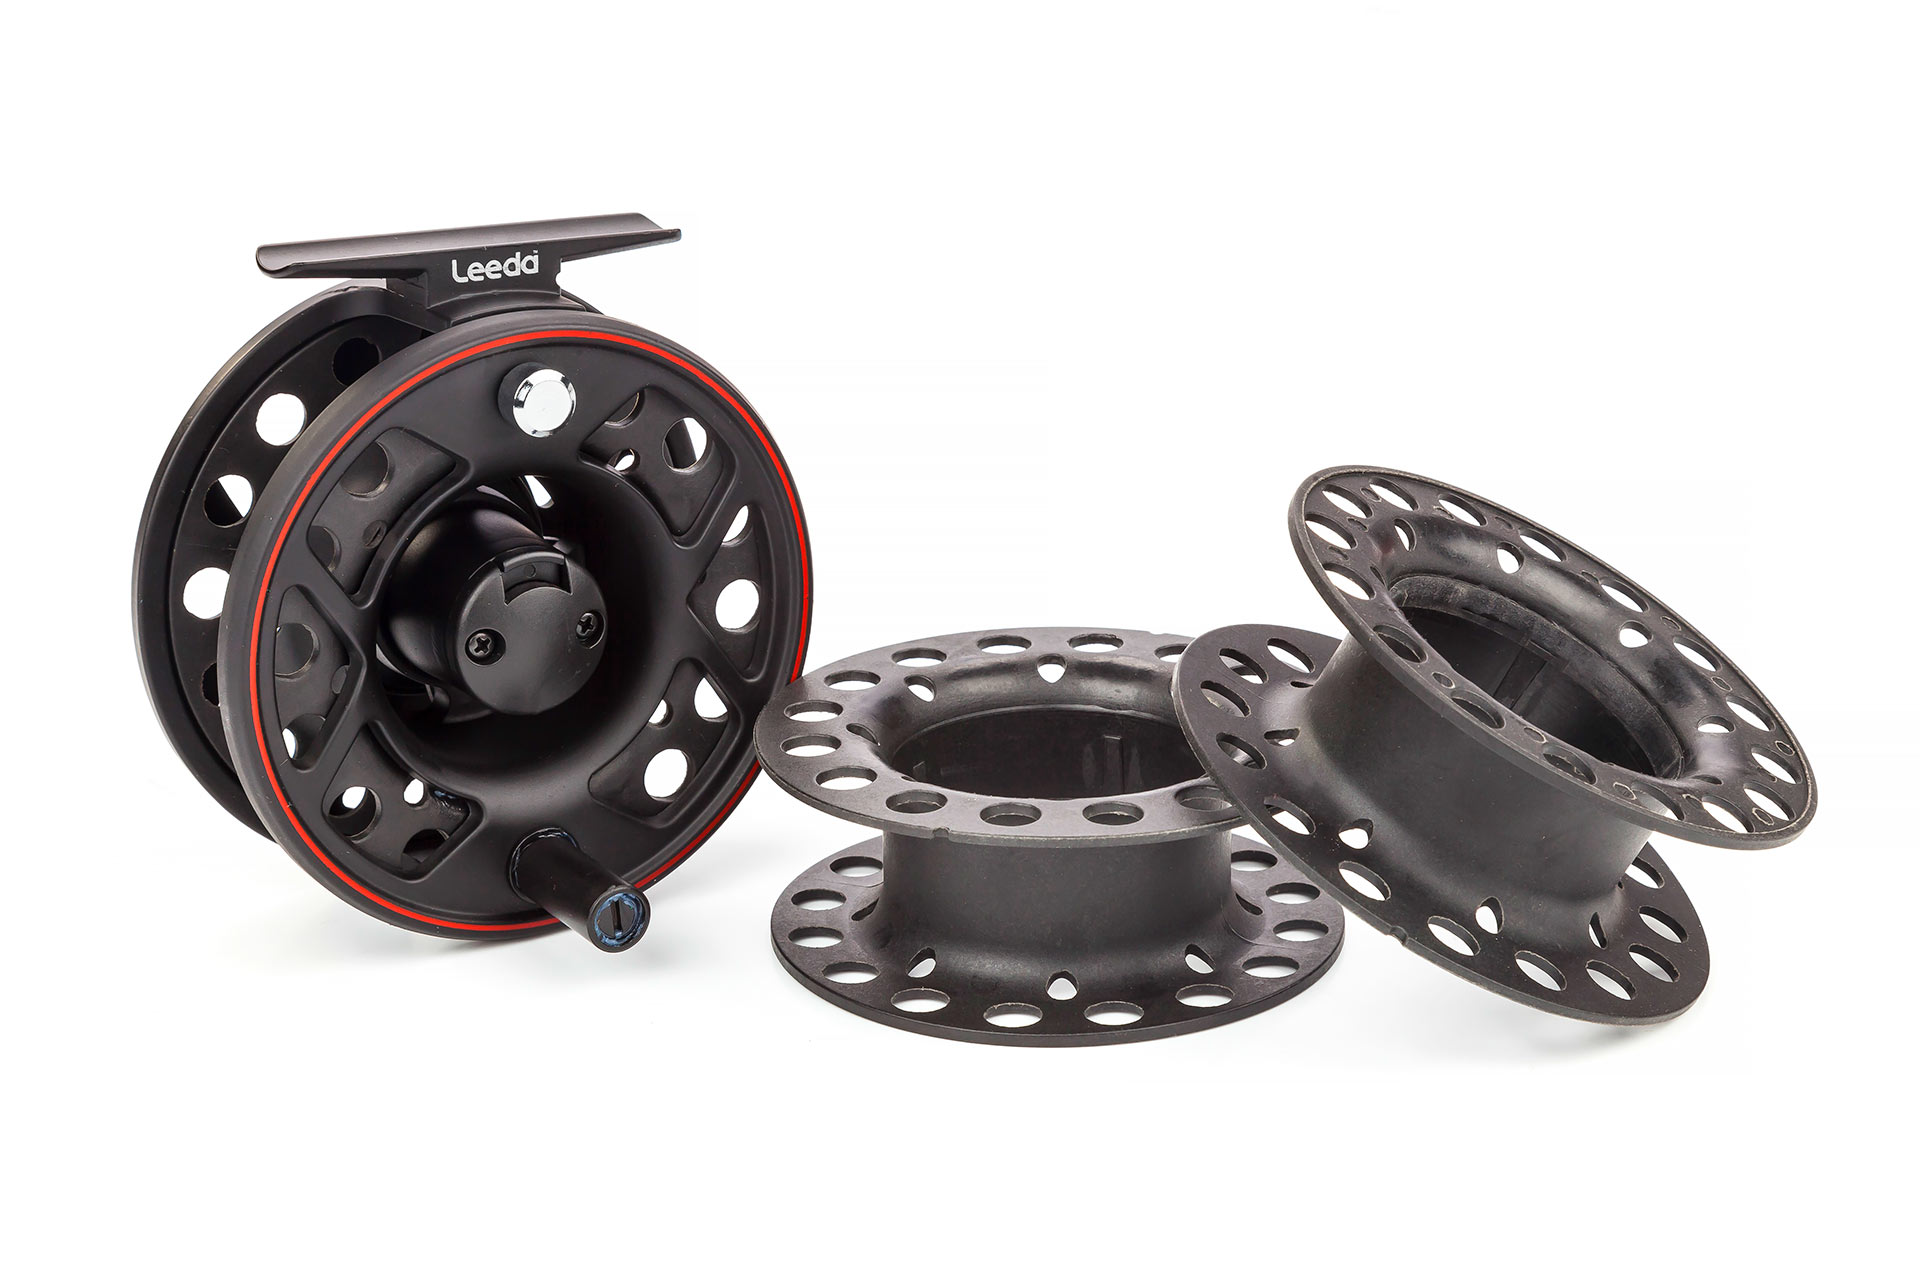 Best cassette fly reels for trout fishing